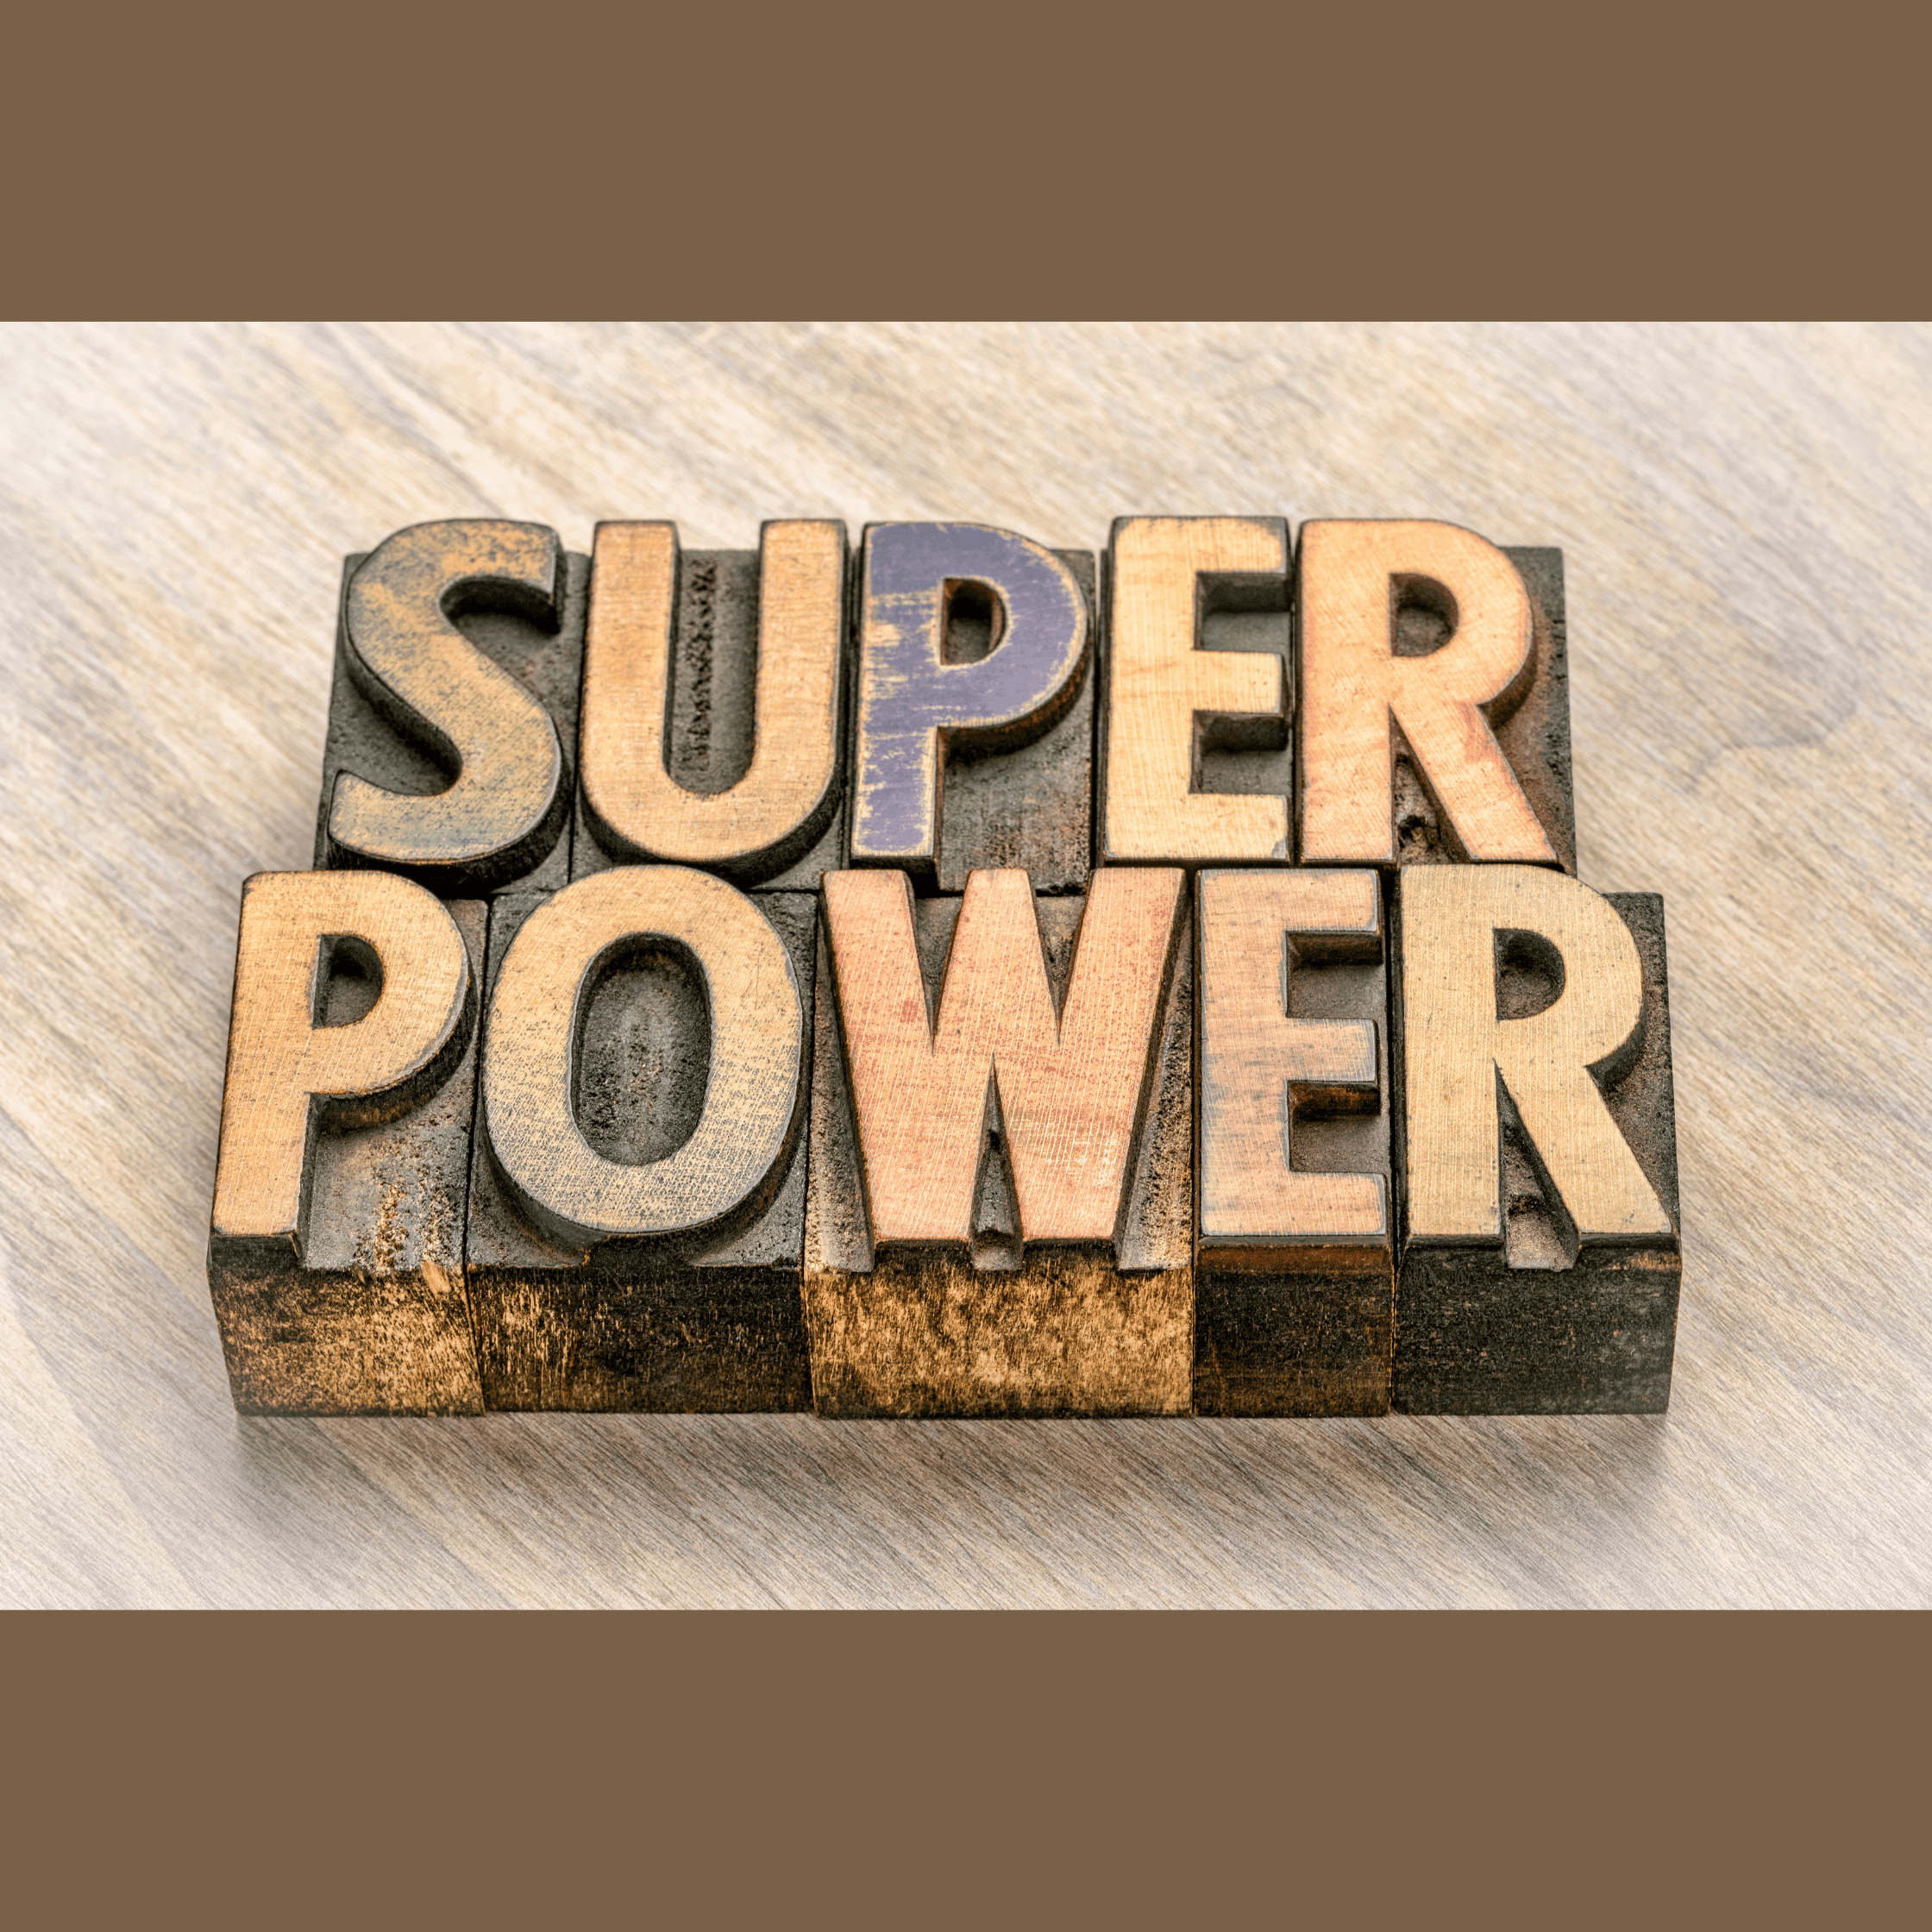 Mental Health in the Law: Know Your Psychological Superpower